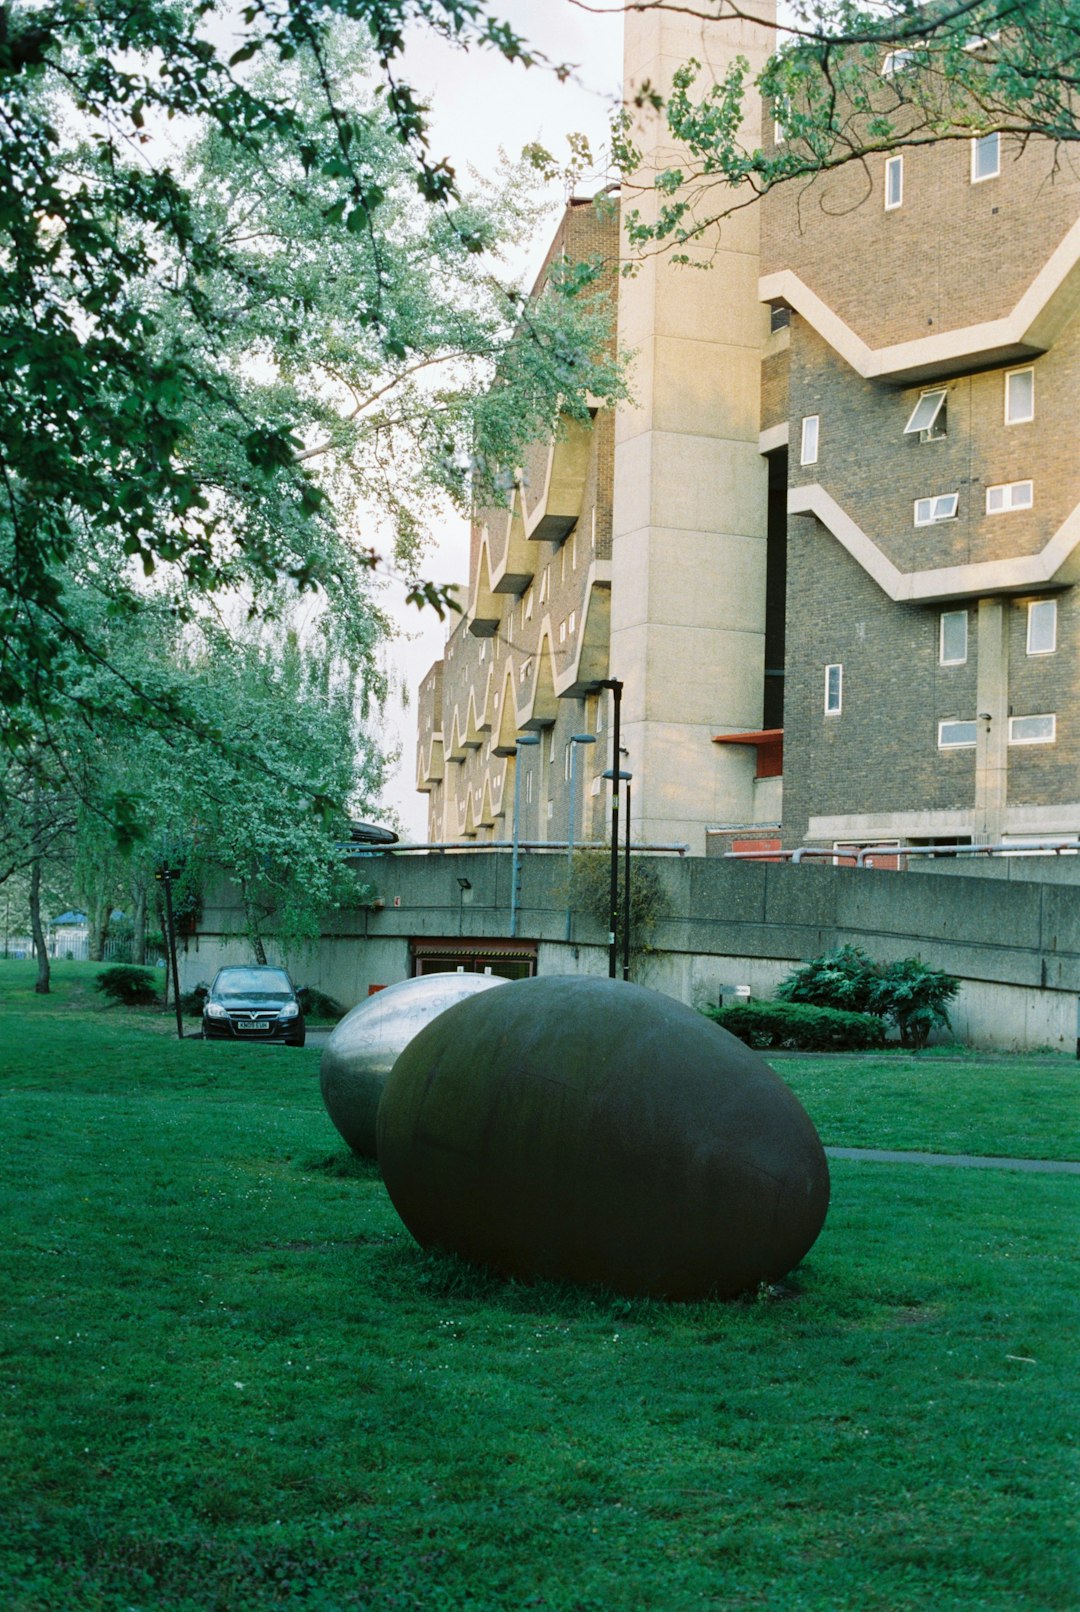 brown round ball on green grass field near brown concrete building during daytime